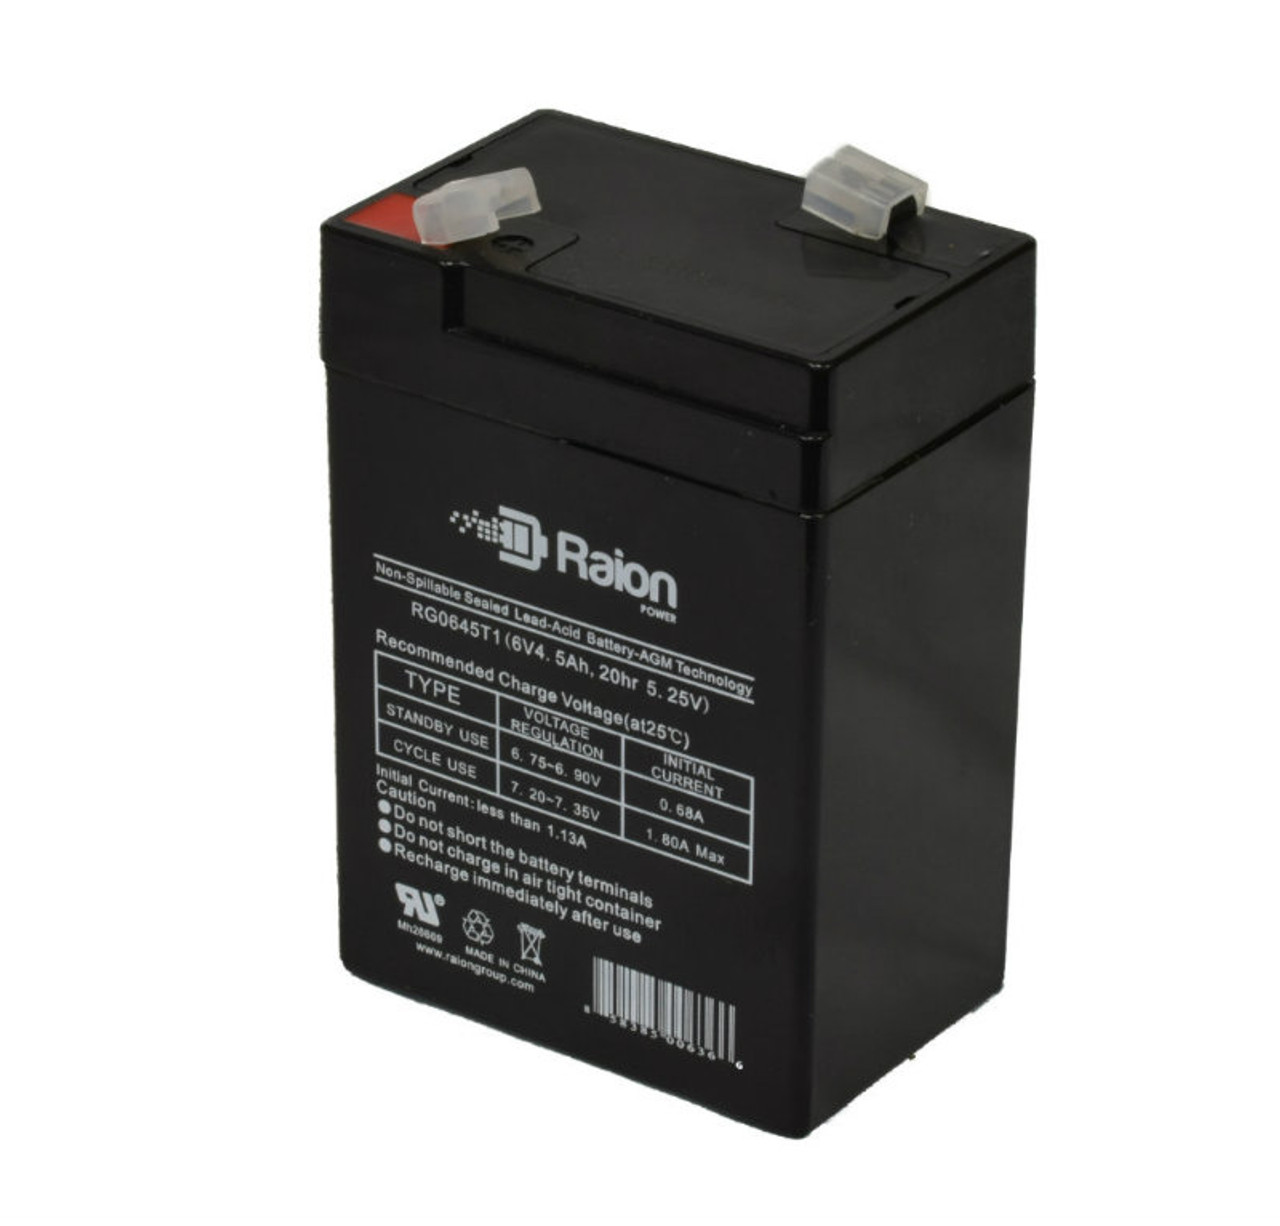 Raion Power RG0645T1 6V 4.5Ah Replacement Battery Cartridge for GP GB5-6